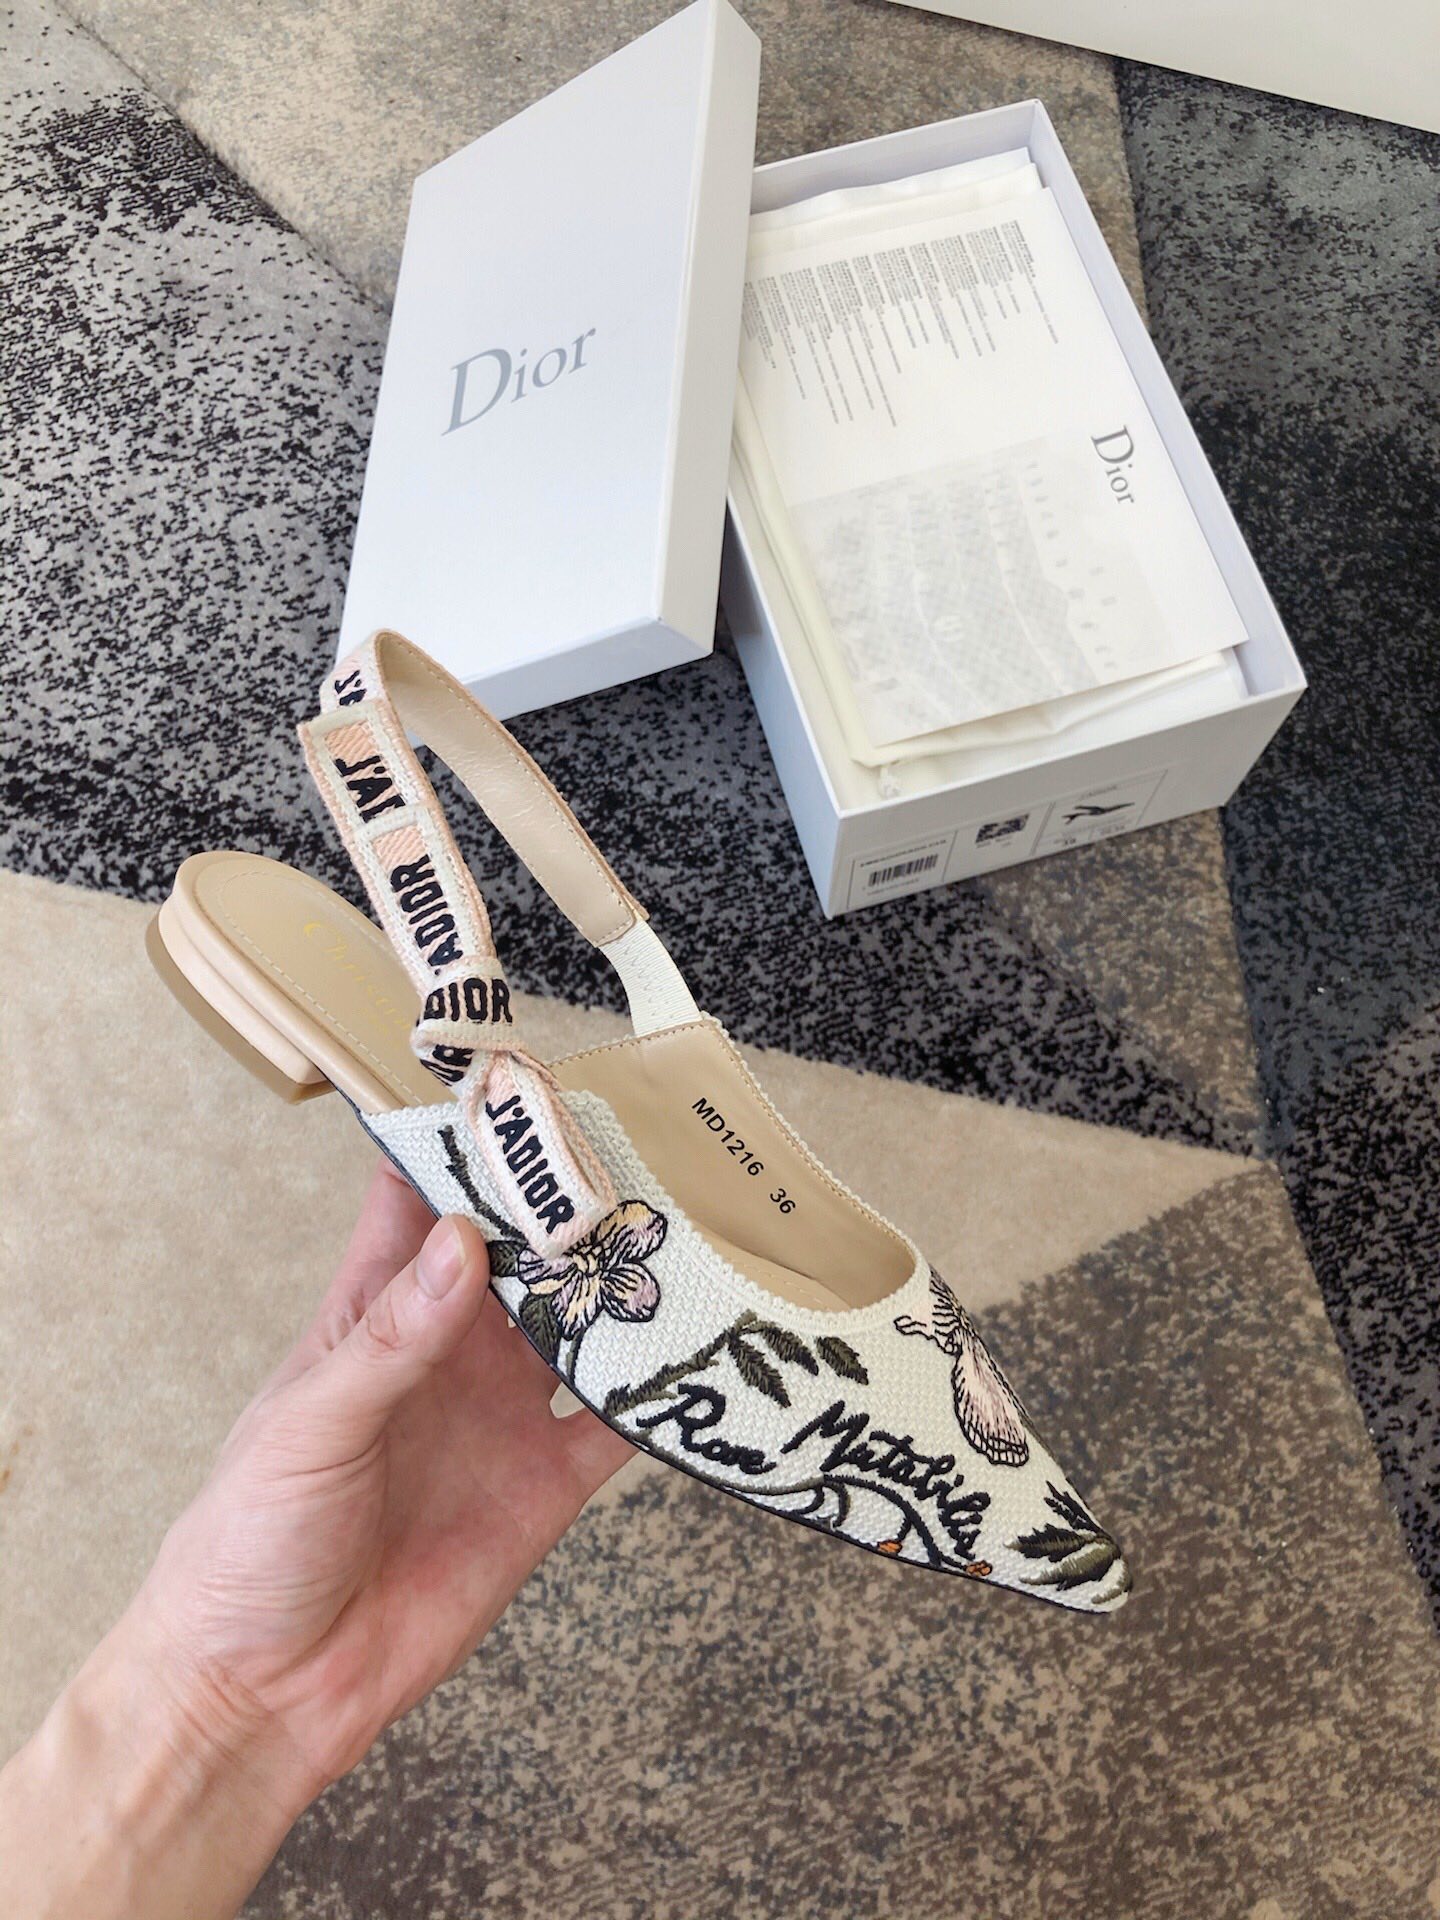 Dior Shoes High Heel Pumps Sandals Embroidery All Copper Genuine Leather Linen Sheepskin Spring/Summer Collection Oblique